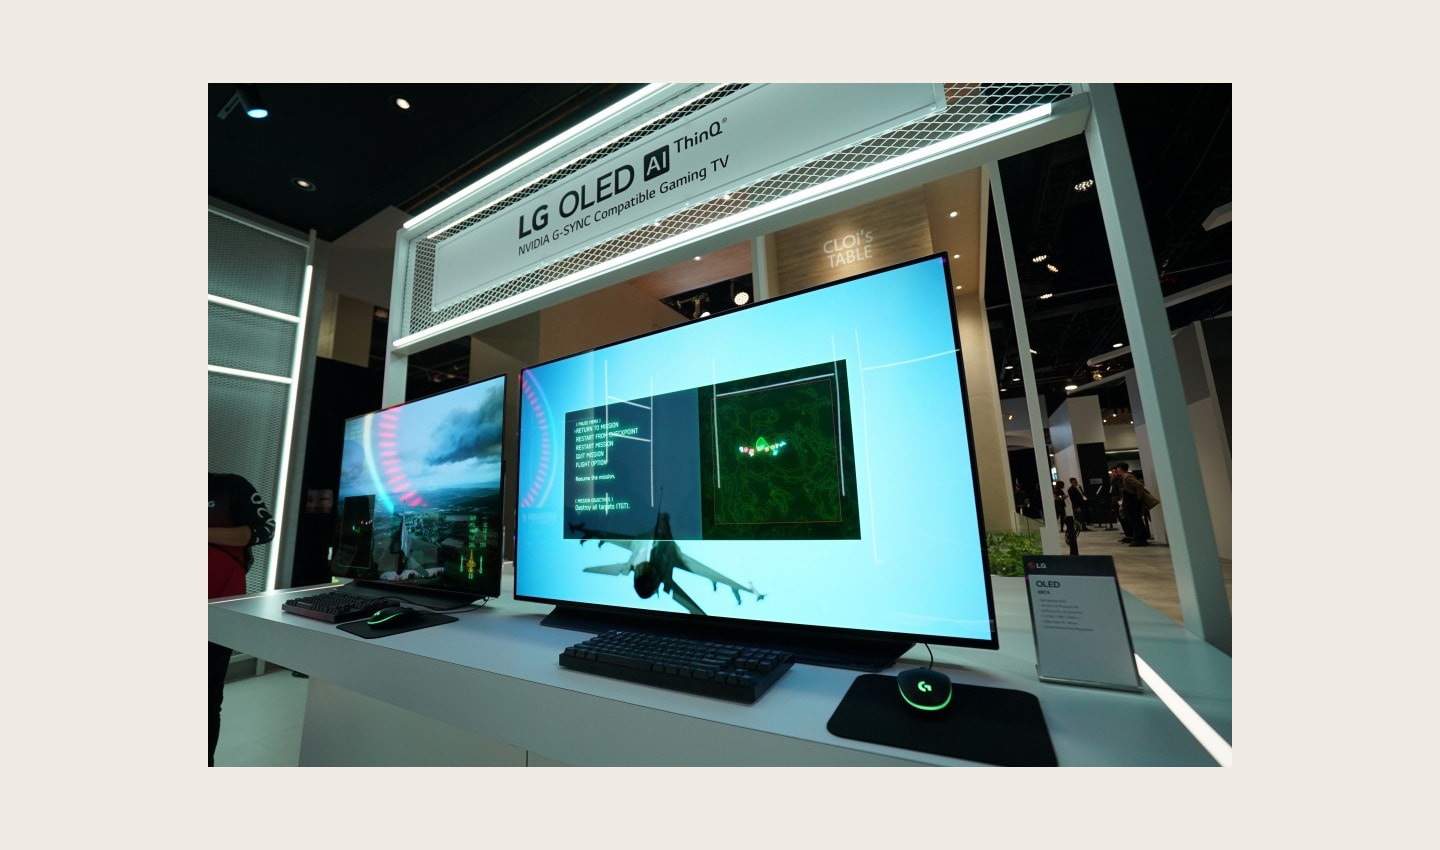 Two LG OLED AI ThinQ gaming TVs showcased in Las Vegas at CES 2020